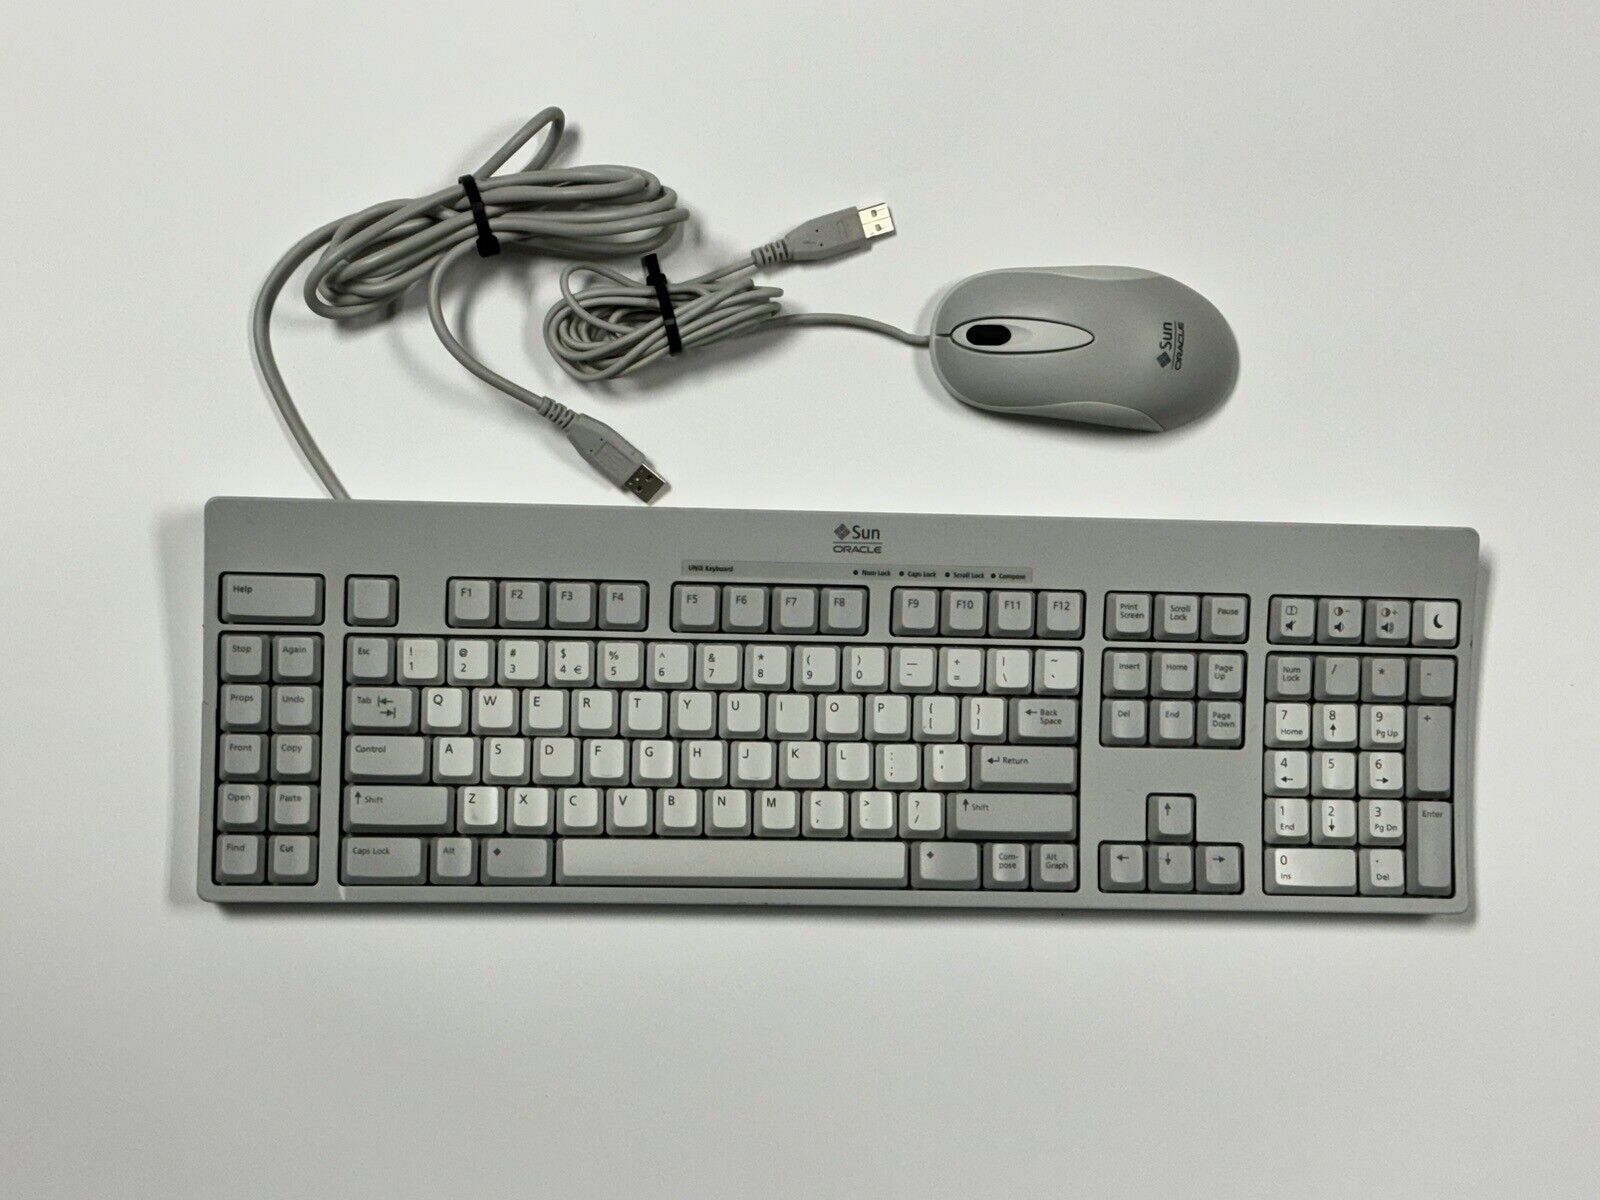 Set Of Sun Oracle USB Keyboard 320-1367-04 & Mouse 371-0788-02